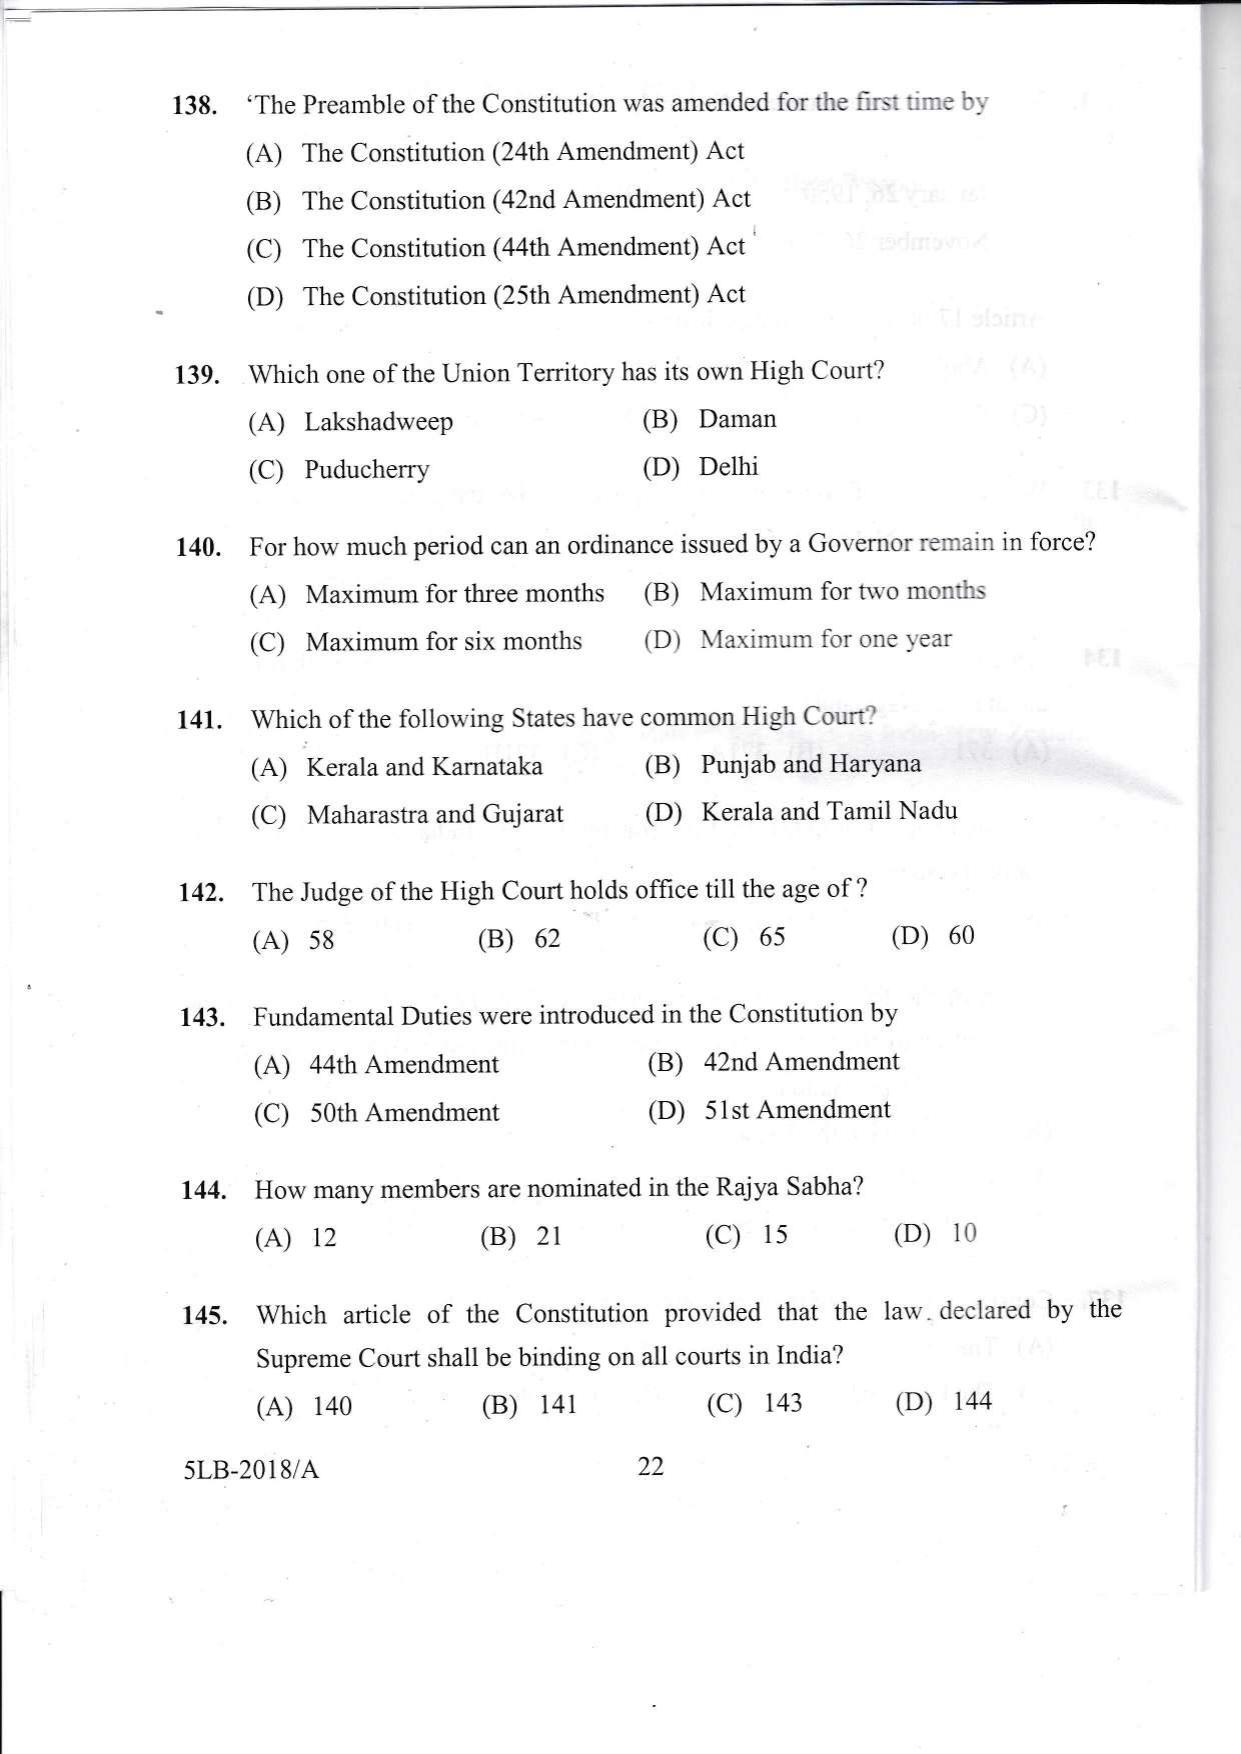 KLEE 5 Year LLB Exam 2018 Question Paper - Page 22